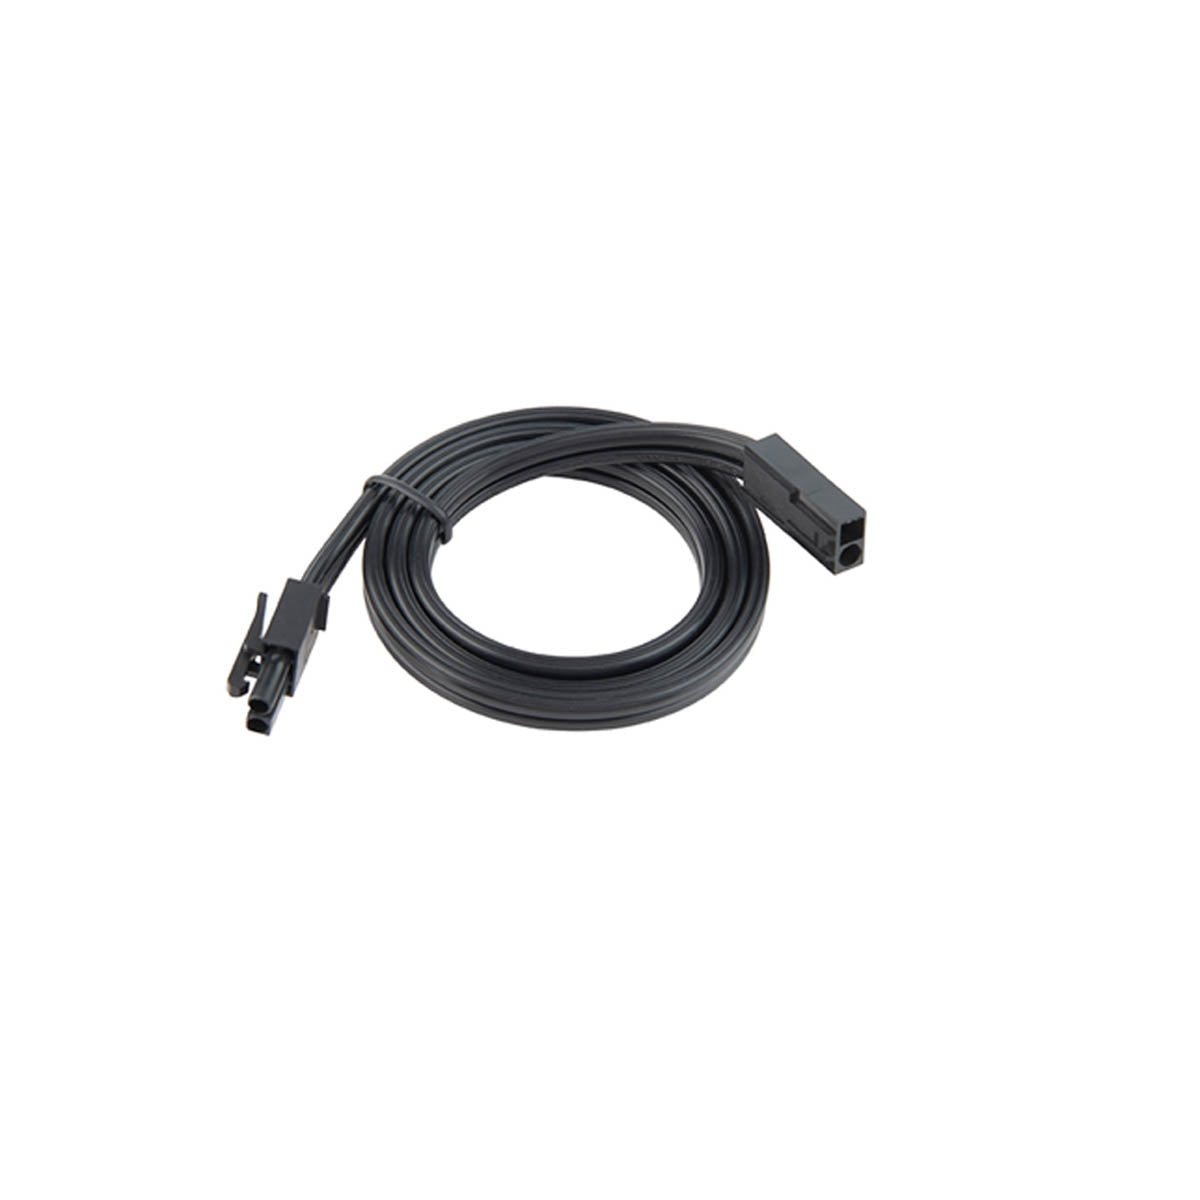 36in. Interconnect Cable for 3-CCT Puck Light, Black